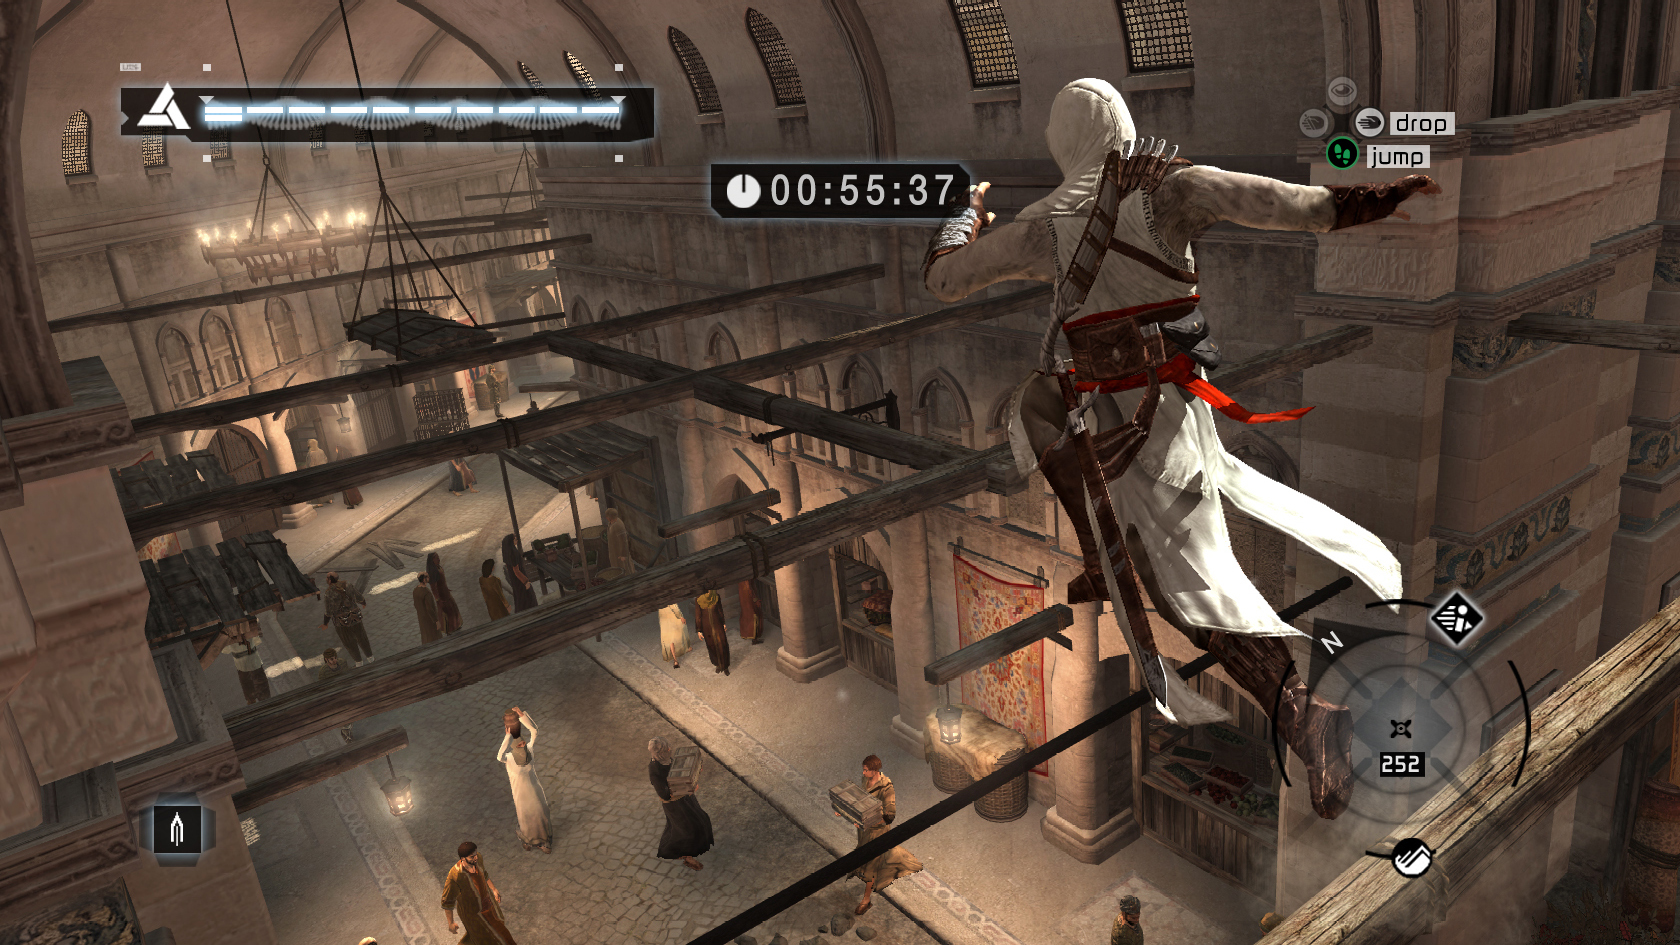 Assassin’s Creed download the new for mac